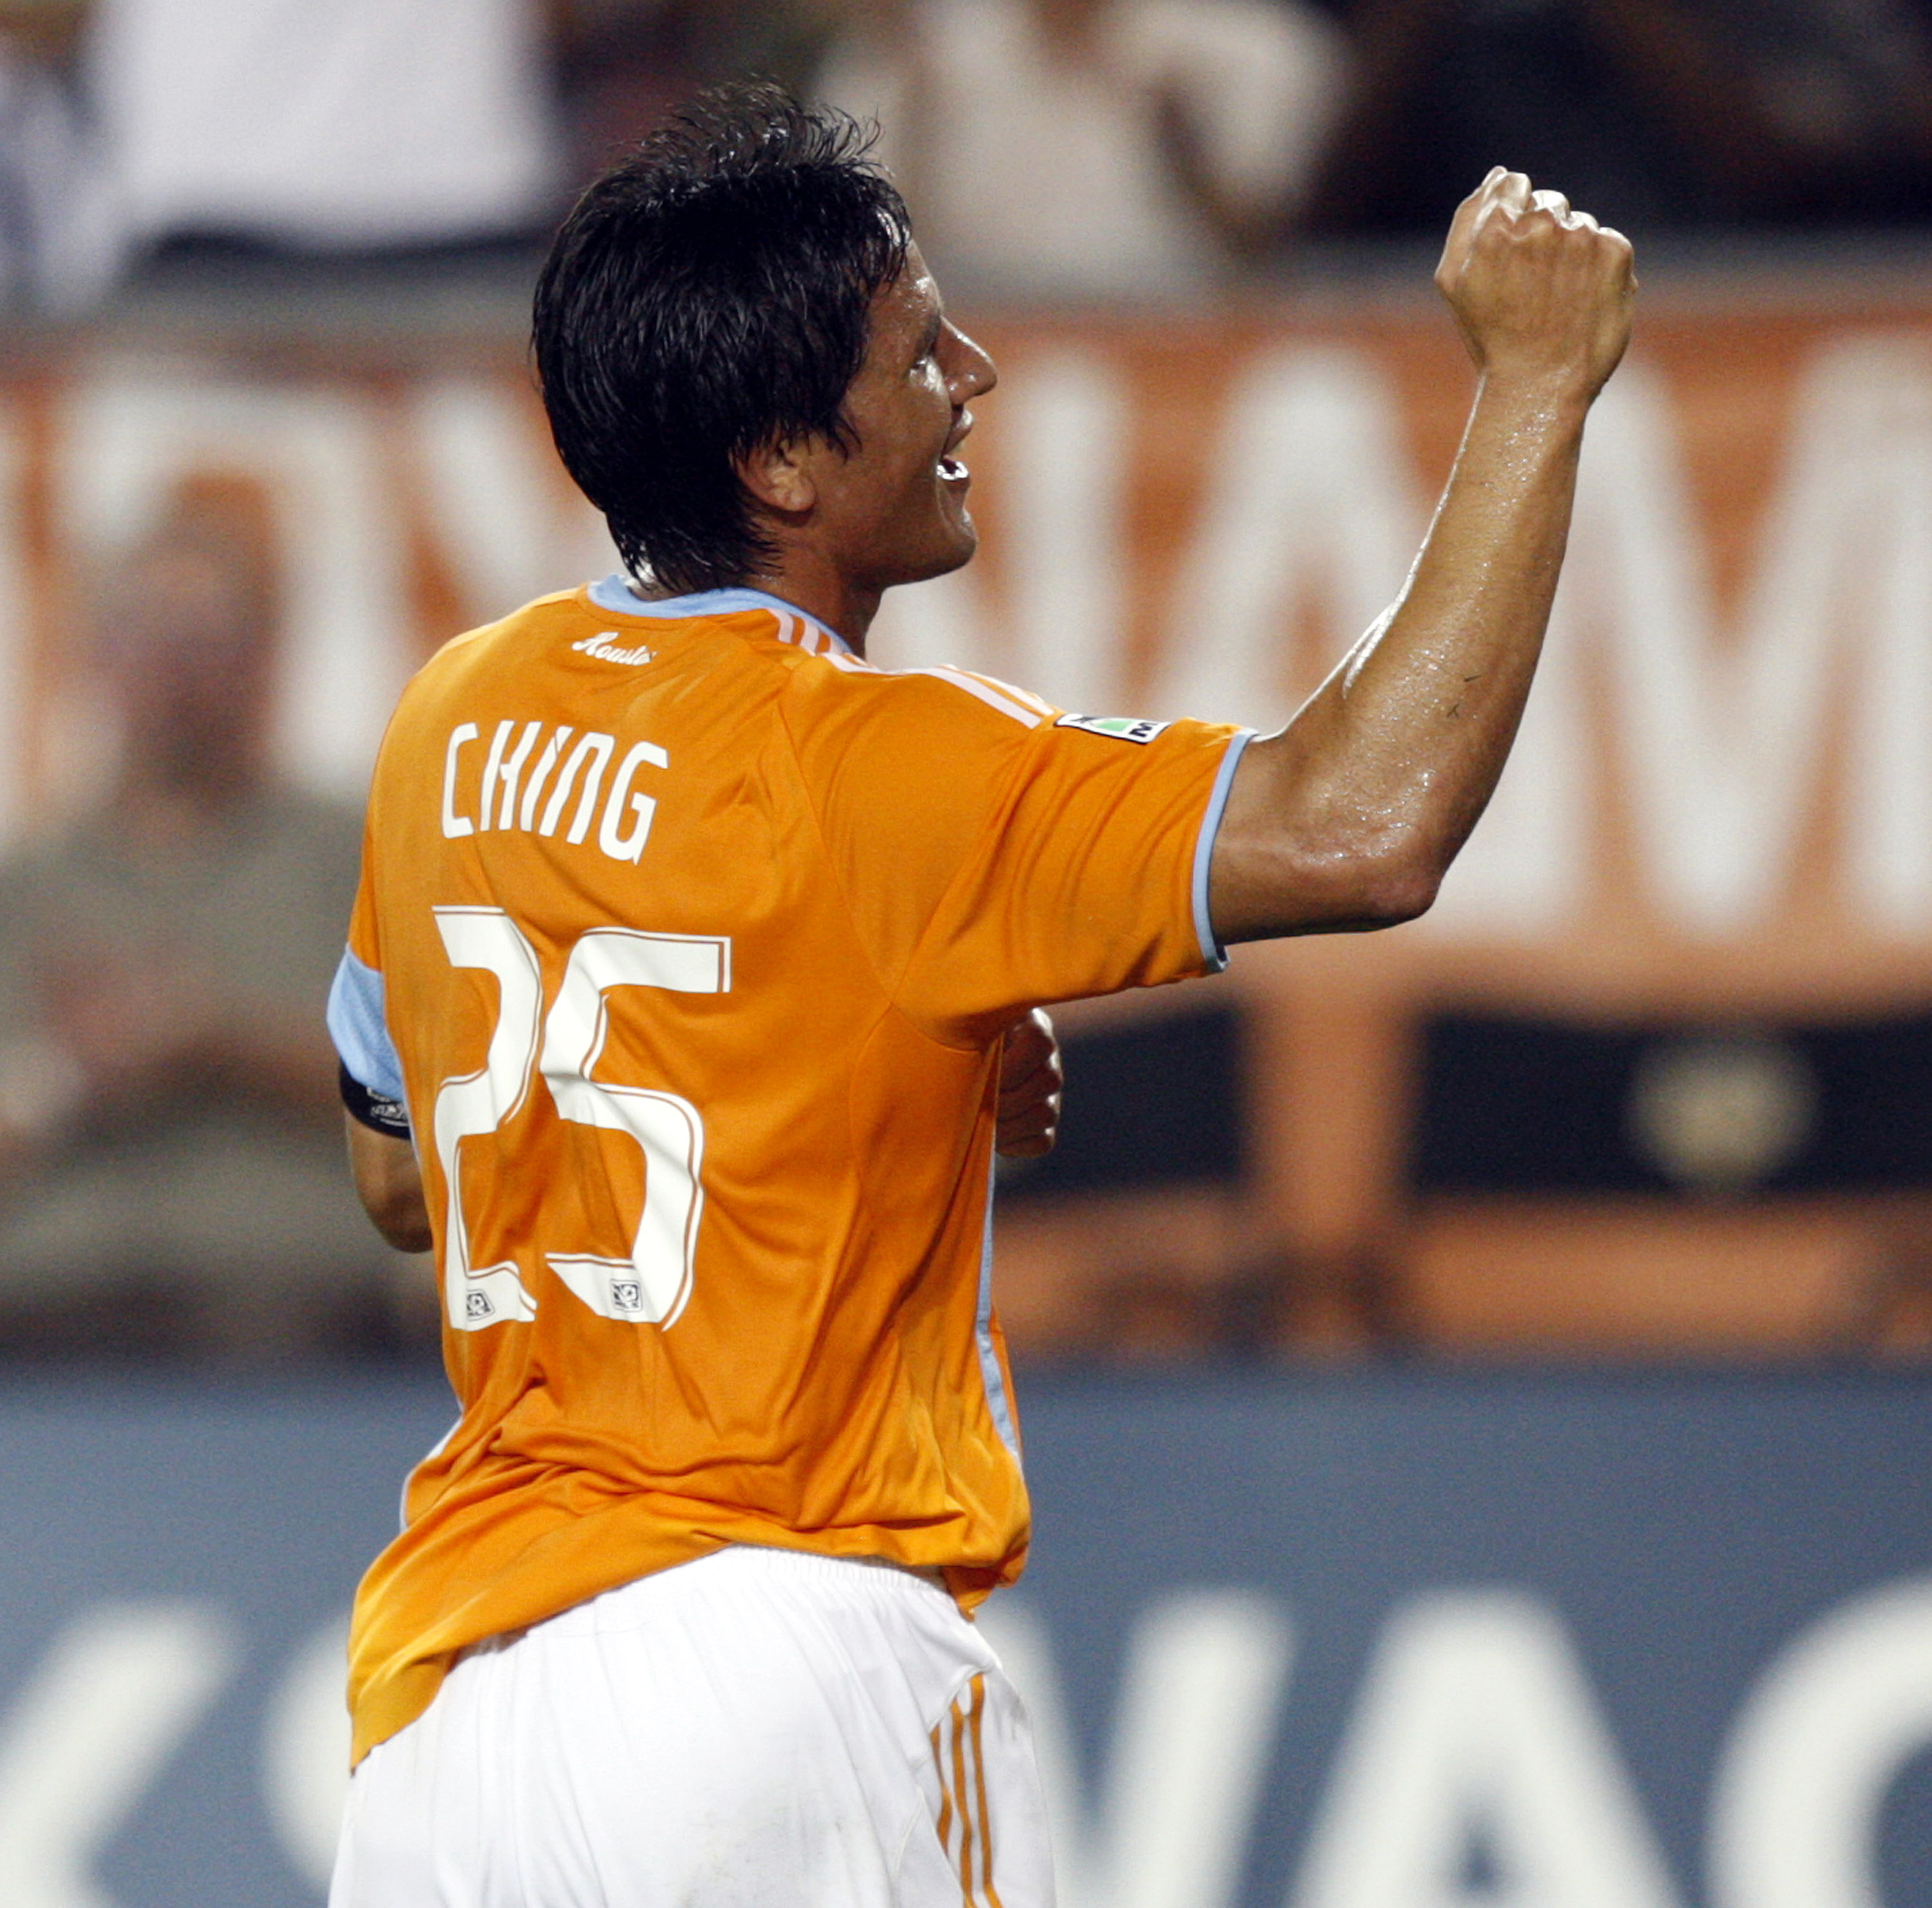 HOUSTON - SEPTEMBER 18:  Brian Ching #25 of the Houston Dynamo celebrates after scoring on a header in the 18th minute against Toronto FC at Robertson Stadium on September 18, 2010 in Houston, Texas.  (Photo by Bob Levey/Getty Images)